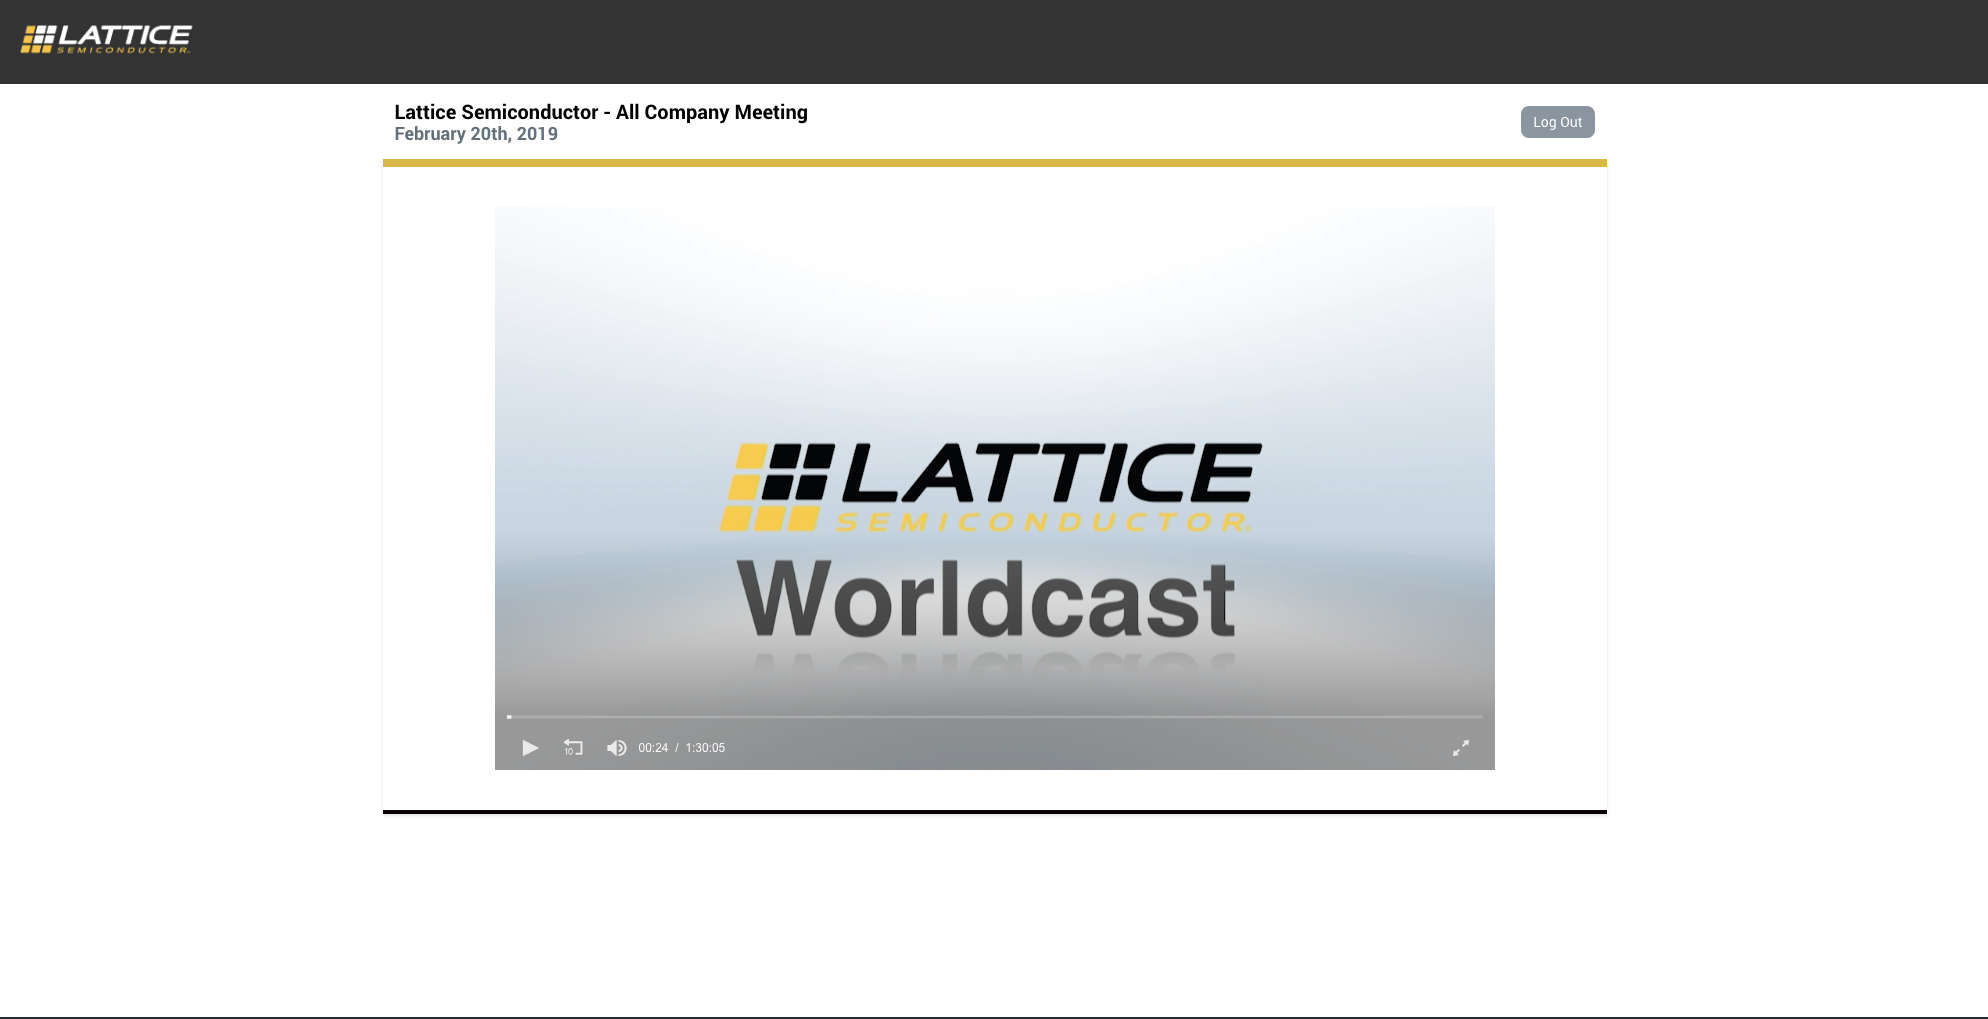 Townhall webcast for Lattice Semiconductor